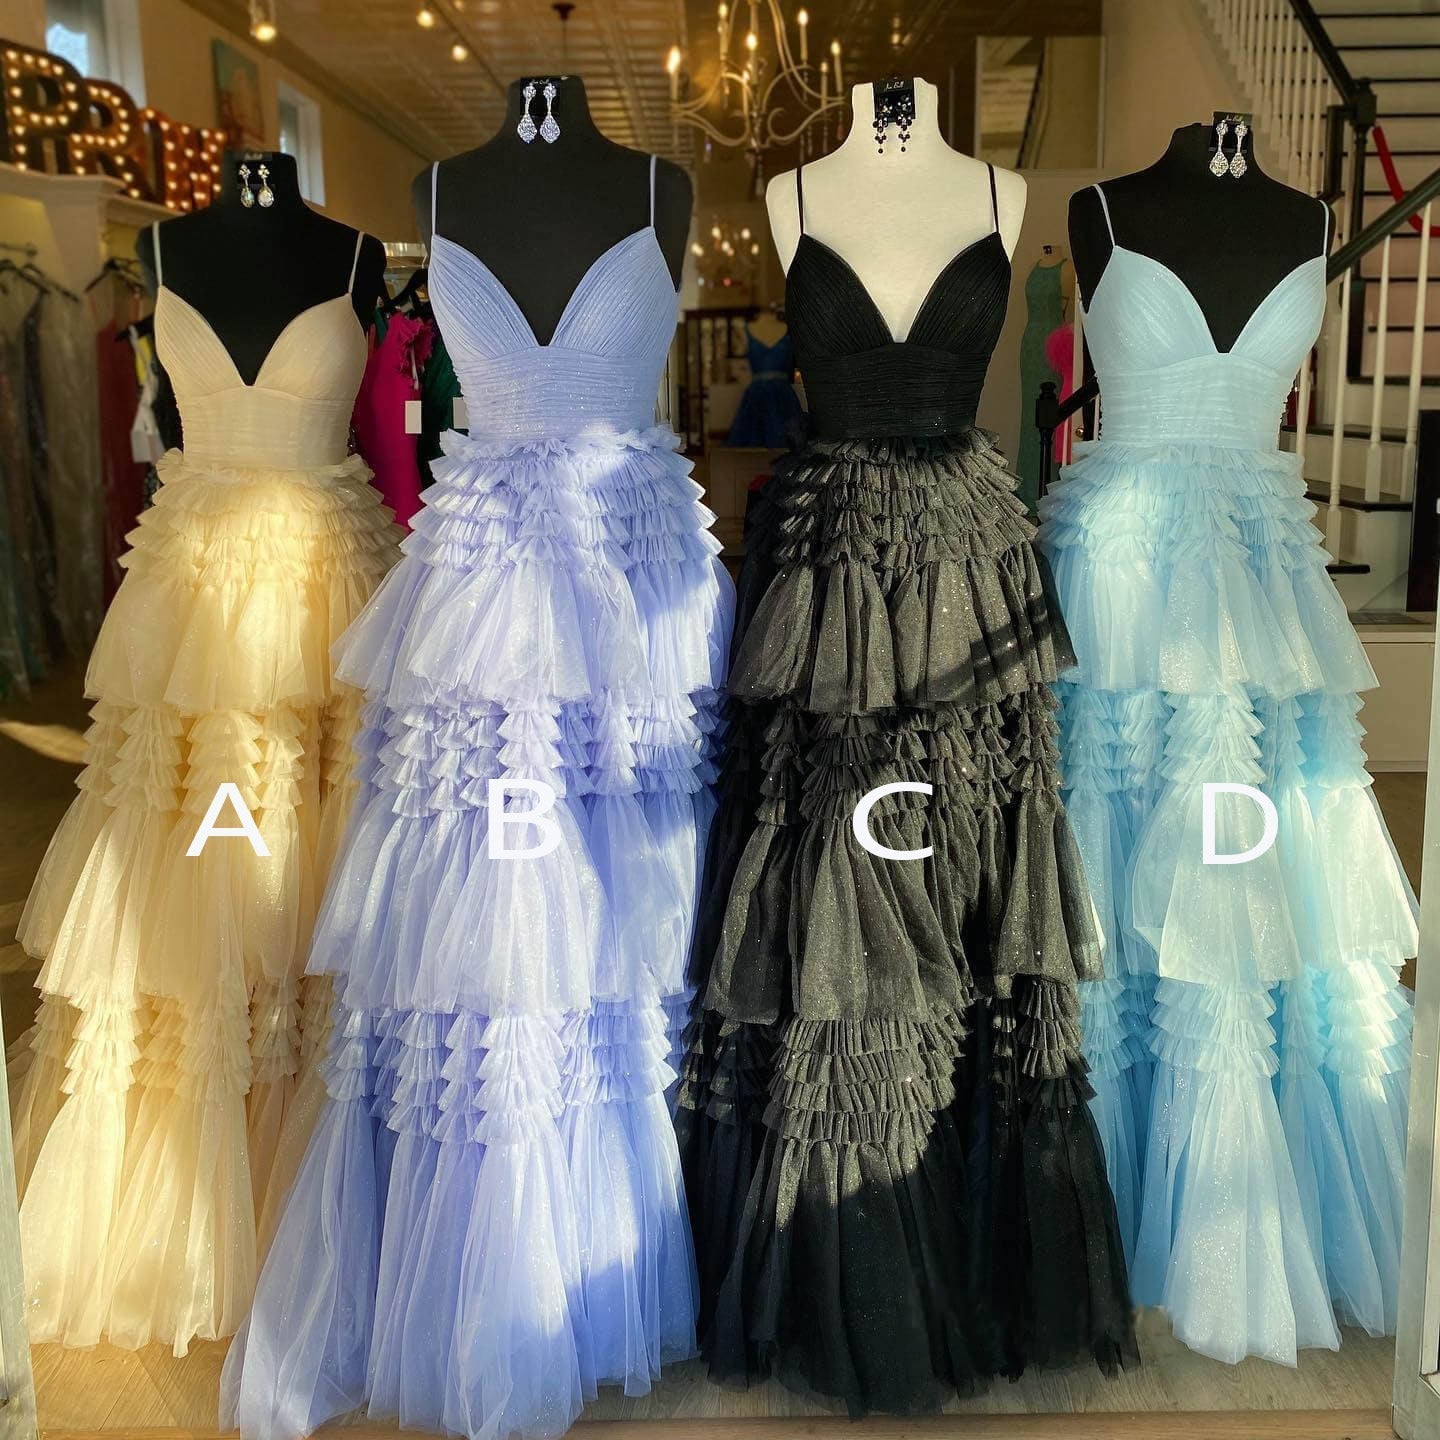 Dinner Dress Classy, Sparkly Spaghetti Straps Tiered Tulle Prom Dress, New Long Party Gown